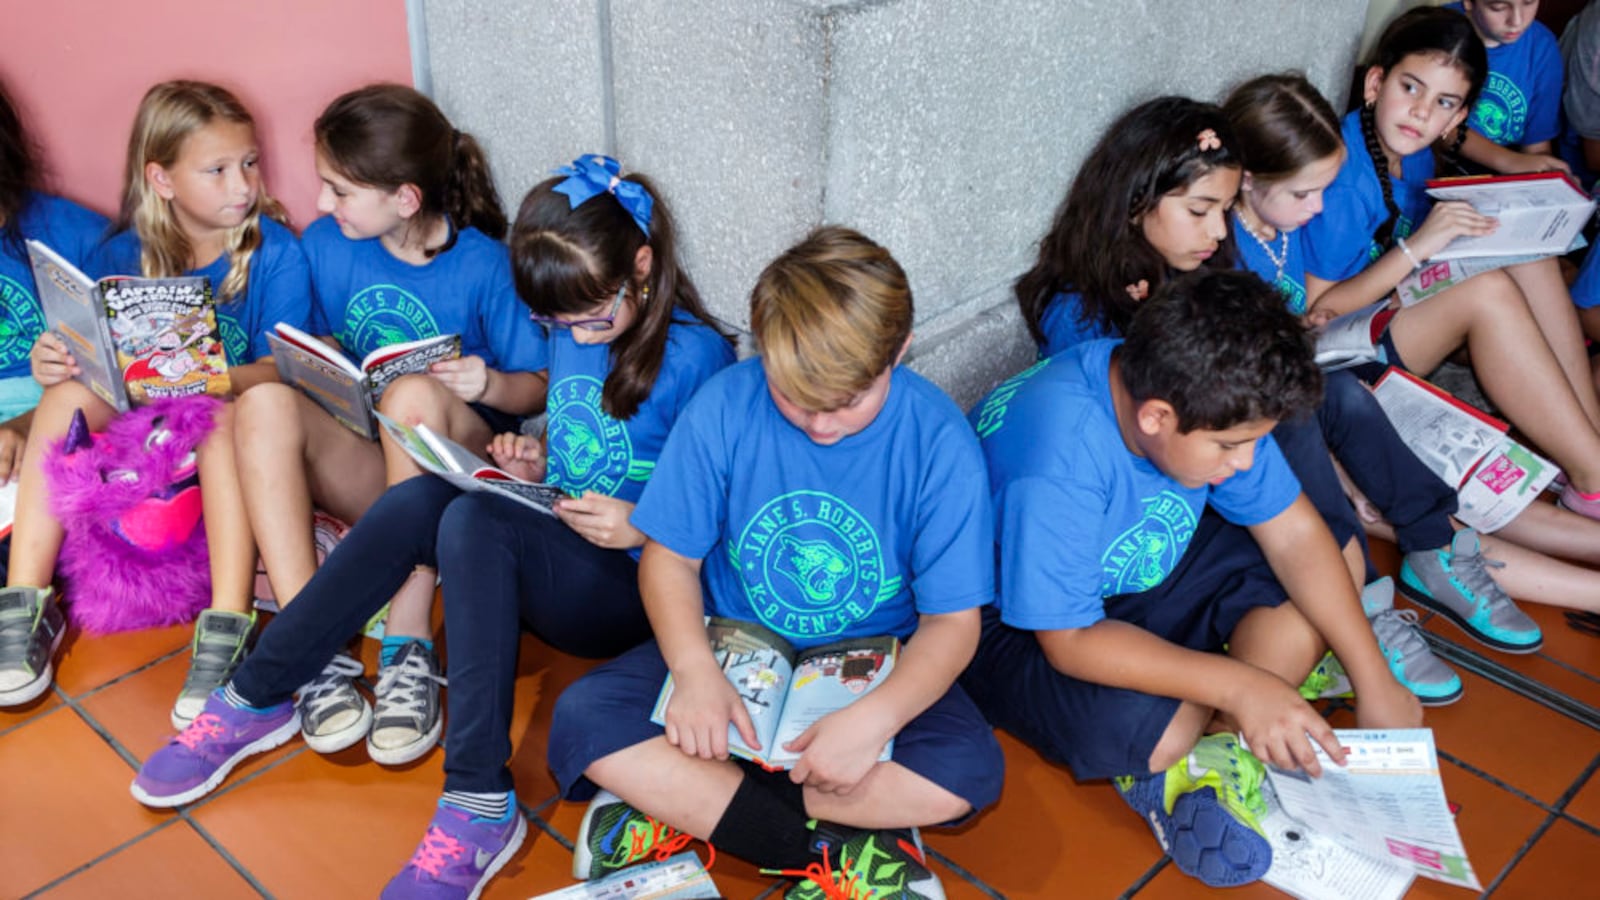 Students reading at the Book Fair International at Miami Dade College Wolfson Campus. (Photo by: Jeffrey Greenberg/UIG via Getty Images)